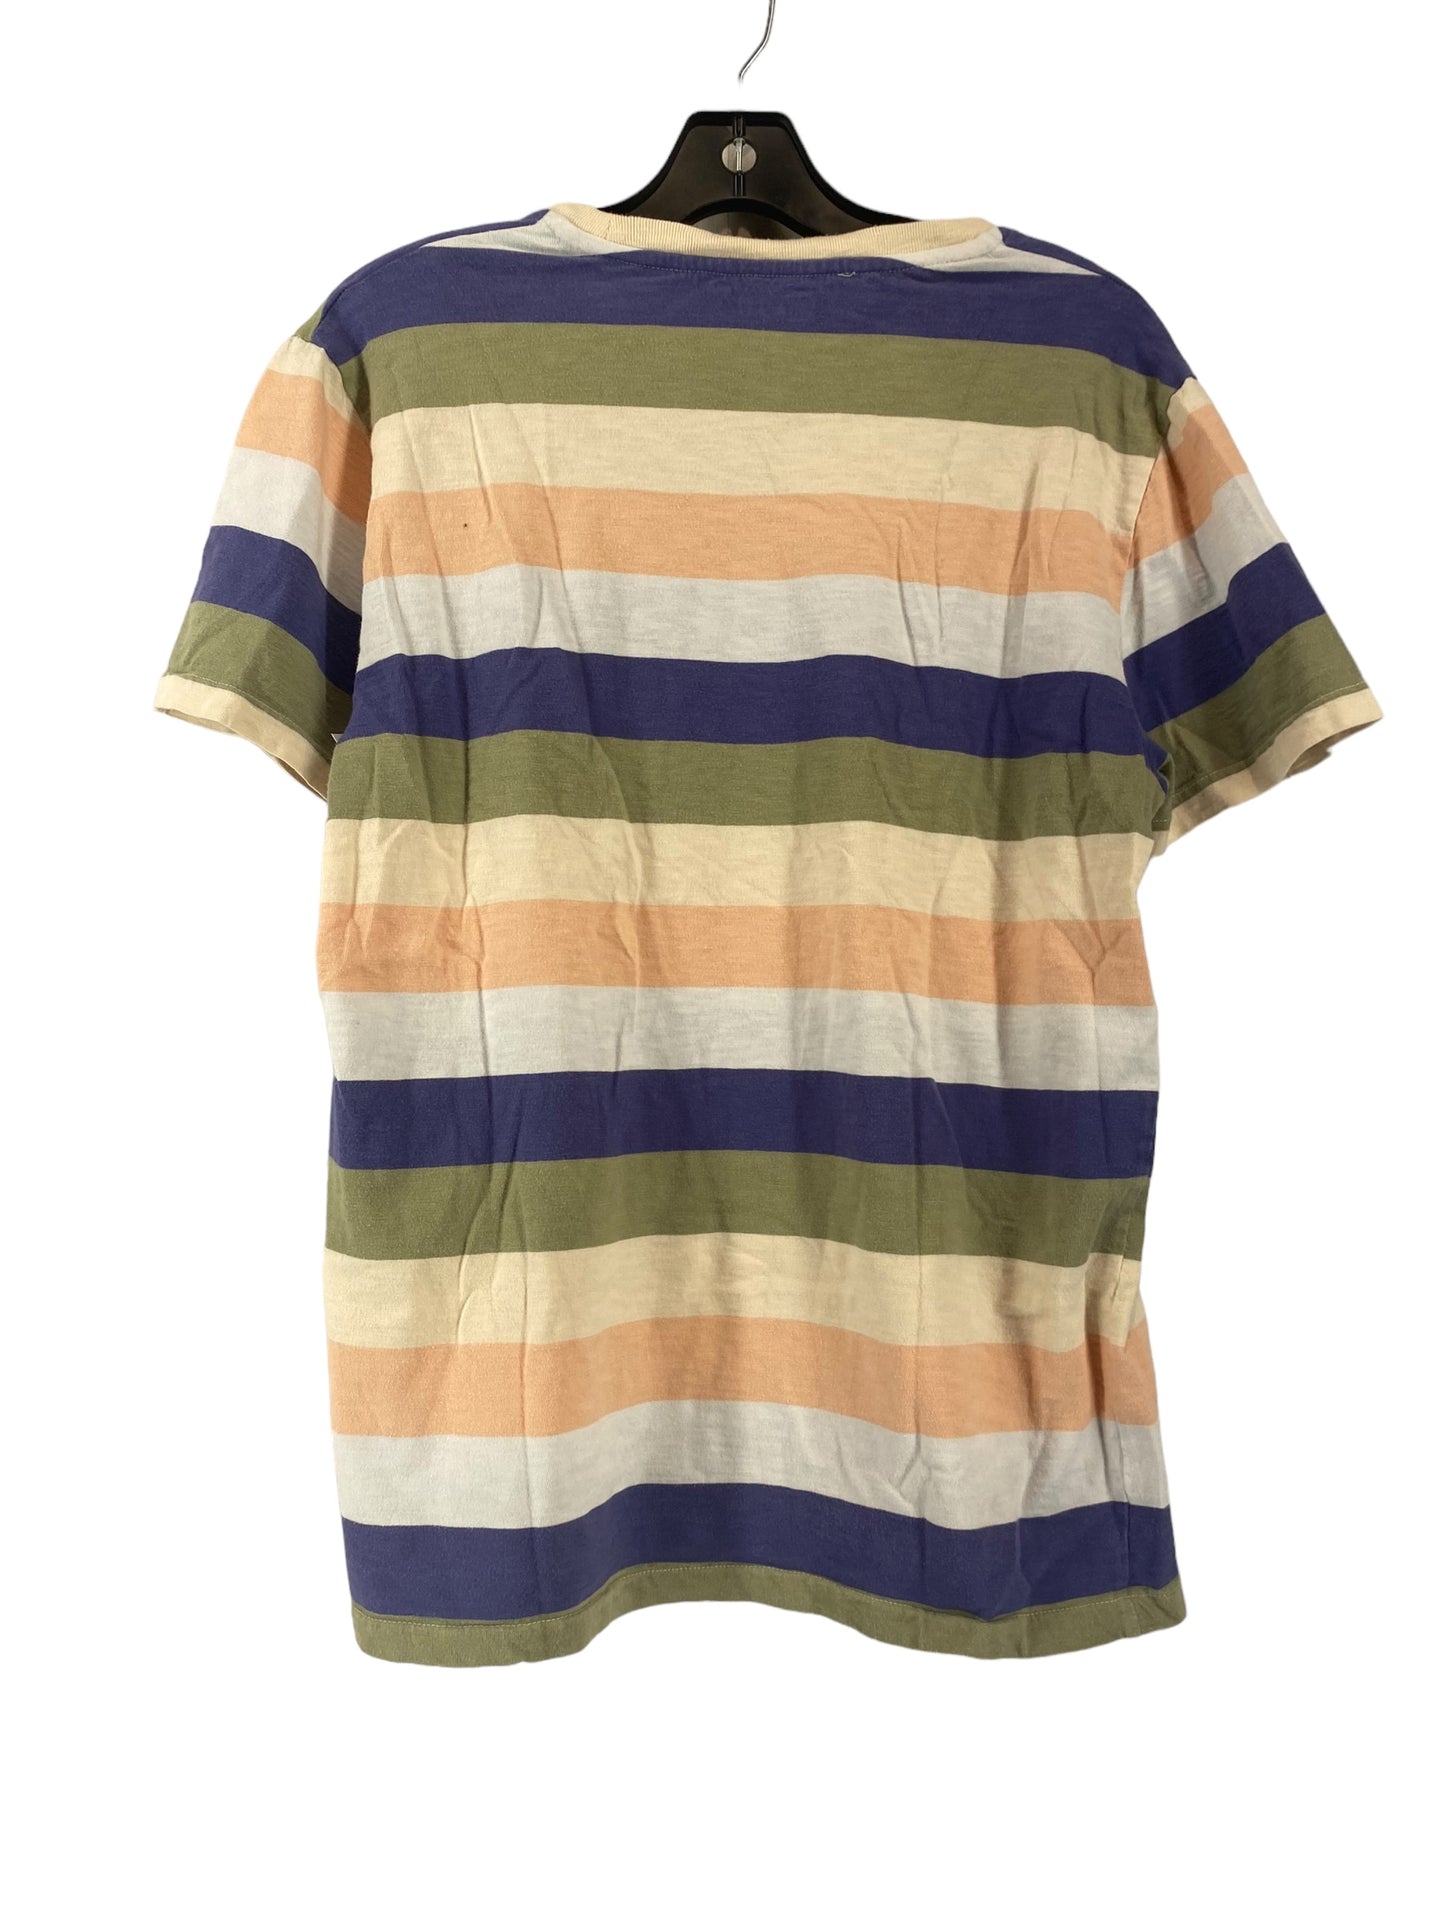 Striped Pattern Top Short Sleeve Basic Madewell, Size M